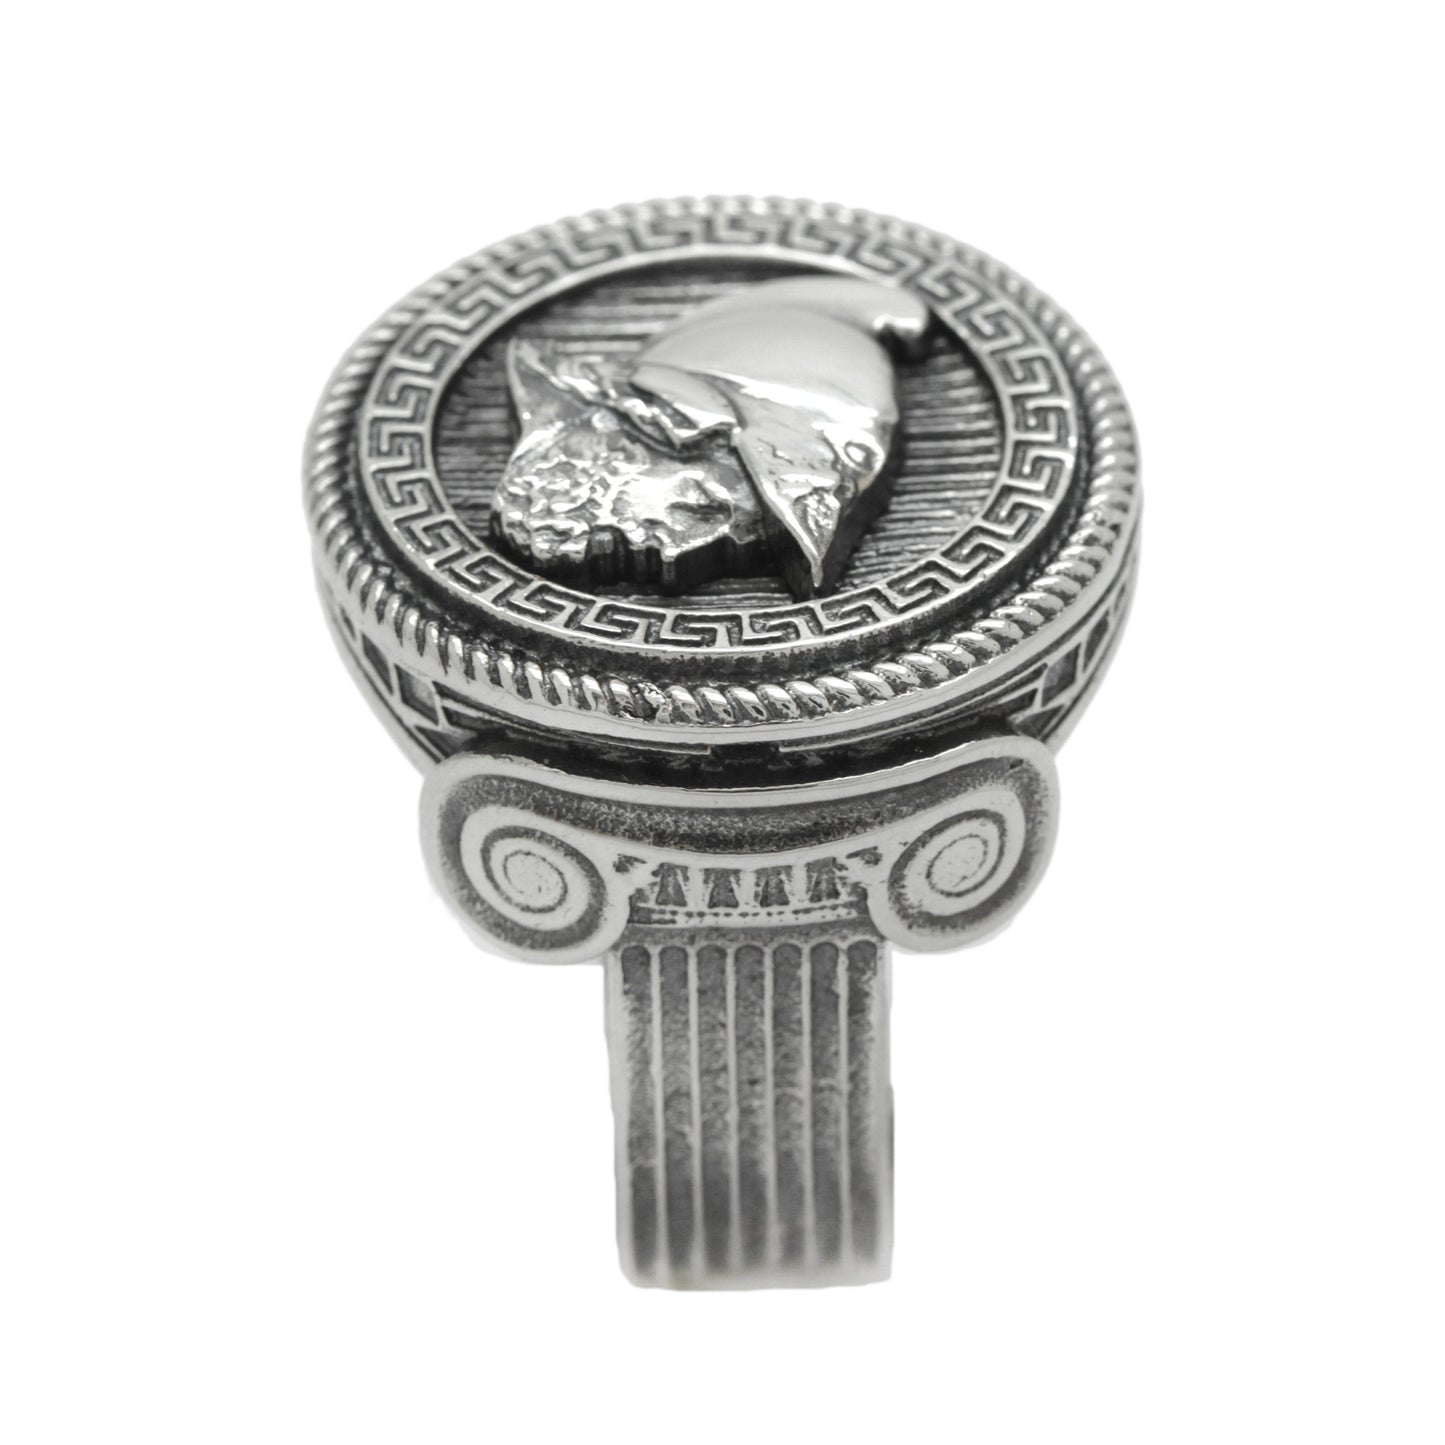 Ares Greek God of Courage and War Ring Sterling Silver Round Top Mens Signet Greek Meander